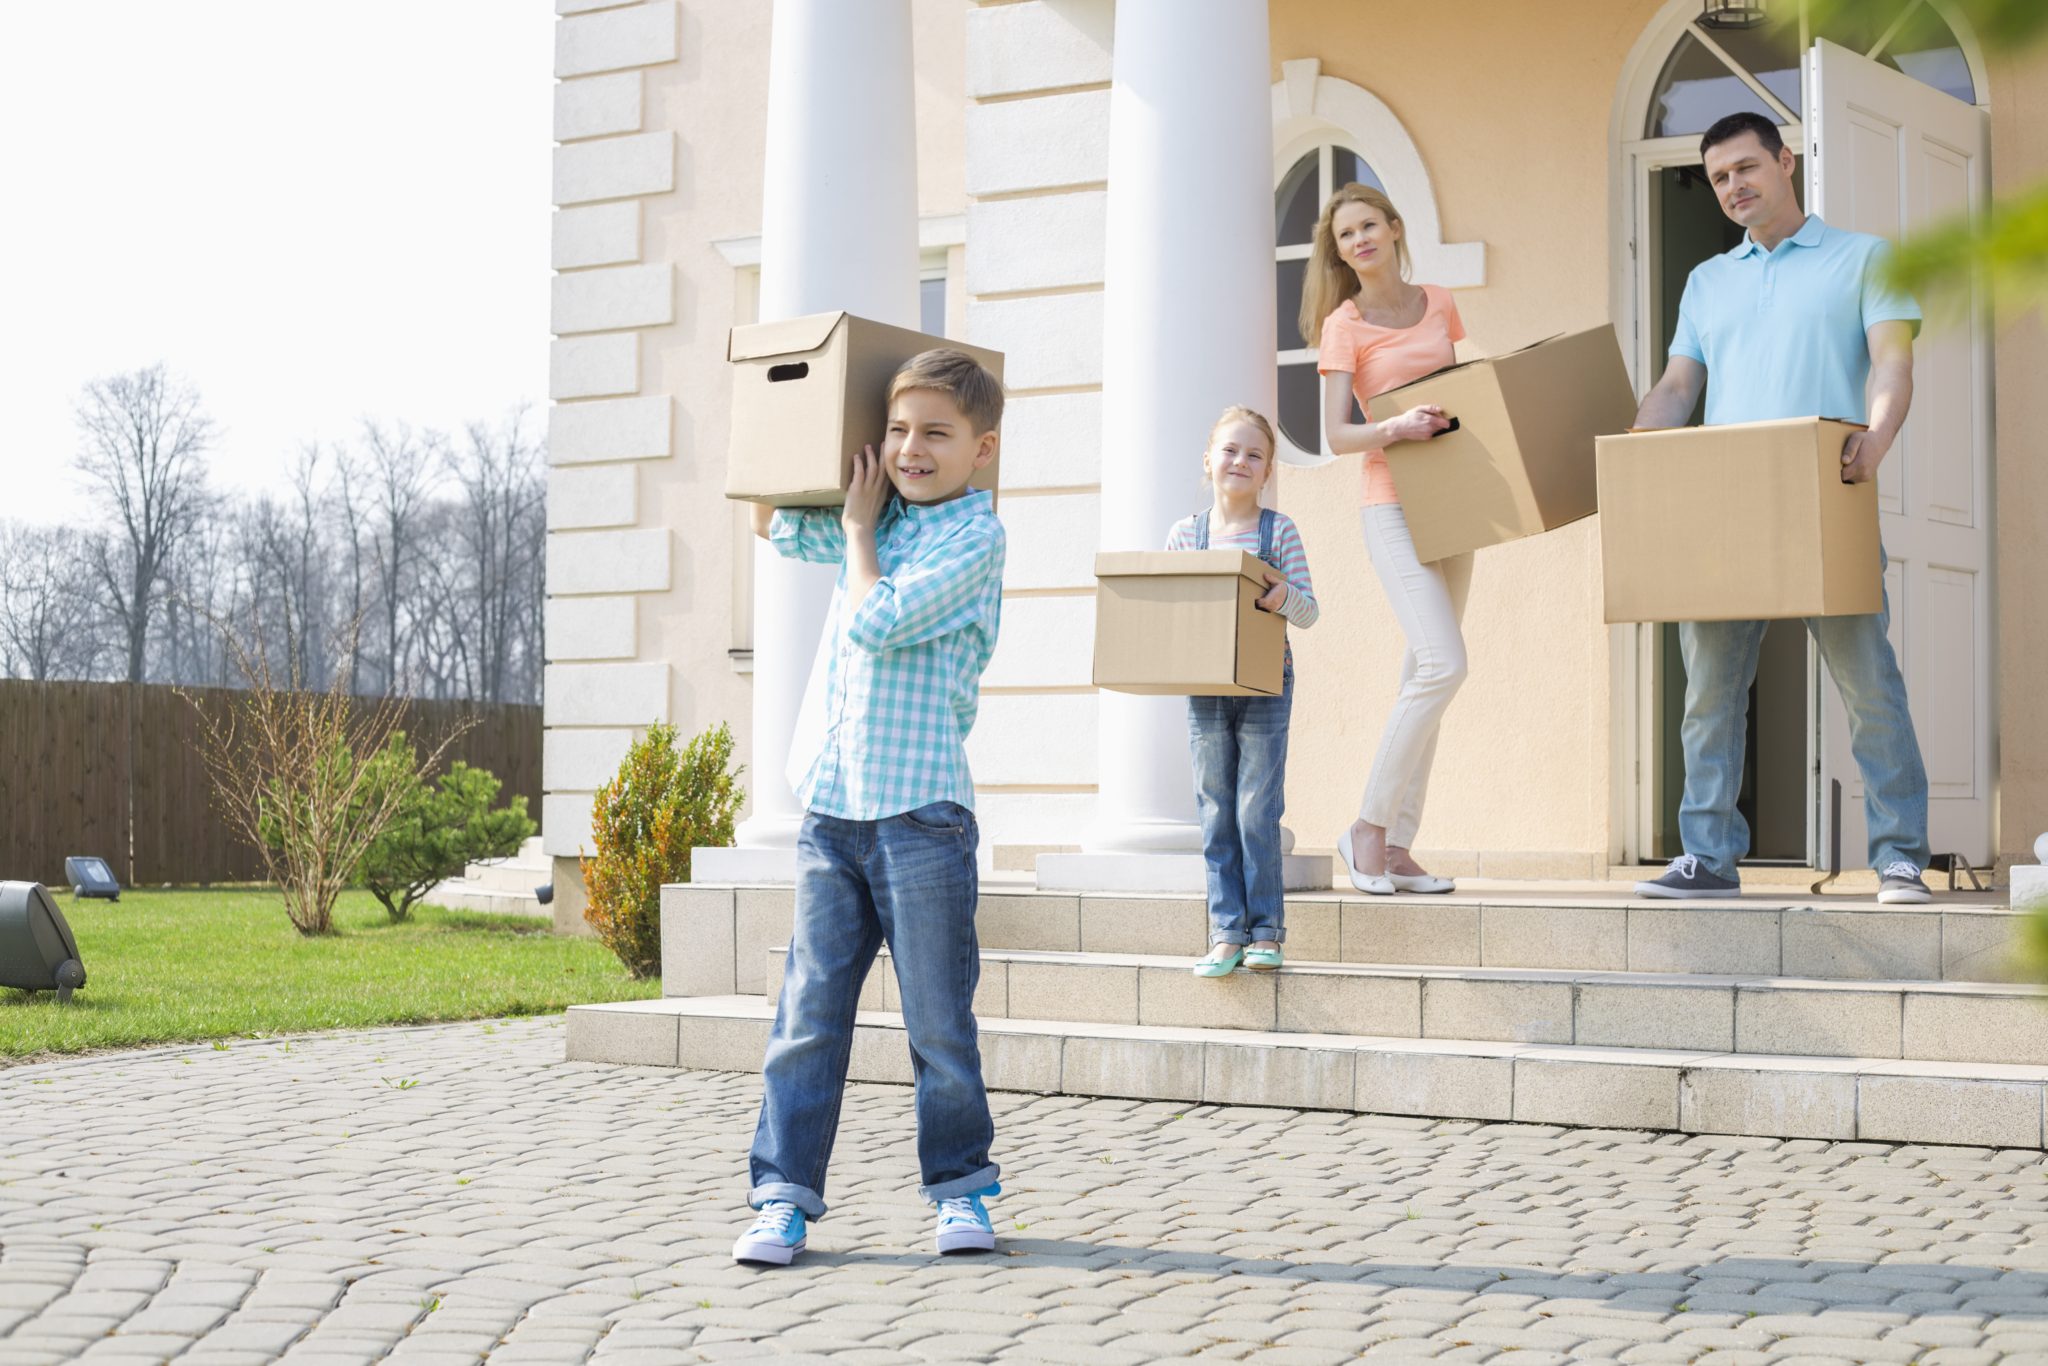 5 Tips to Survive Staging your home for sale with kids